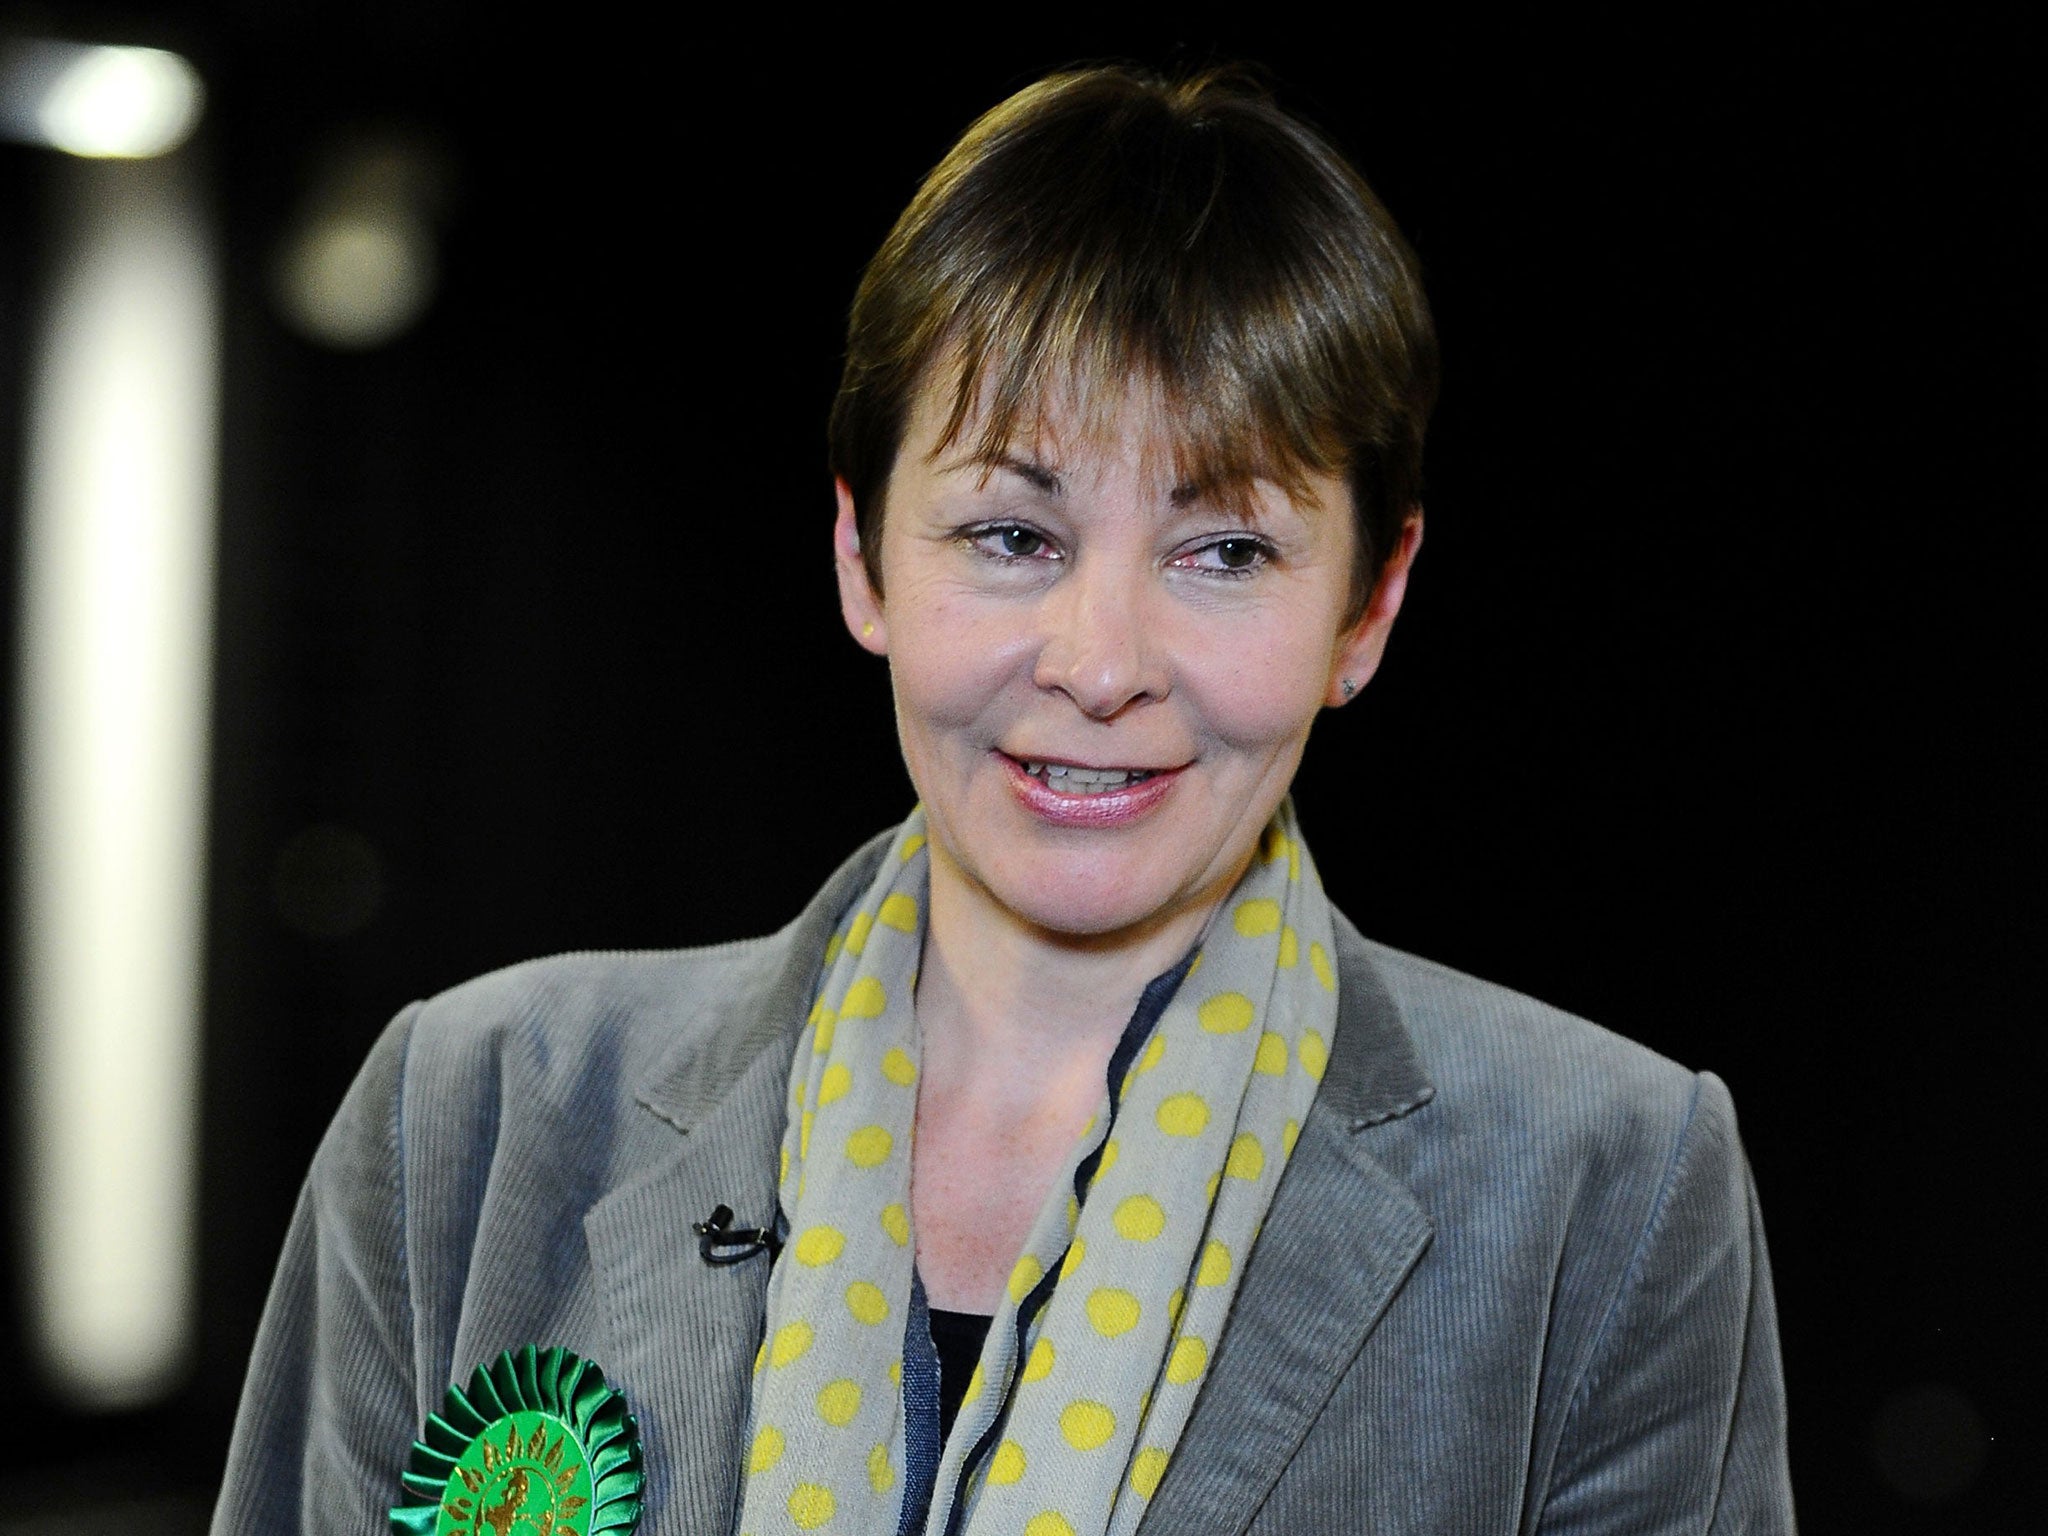 Caroline Lucas says 'there is not a moment to lose... the urgency of a strong, clear Green voice in Parliament has never been greater'